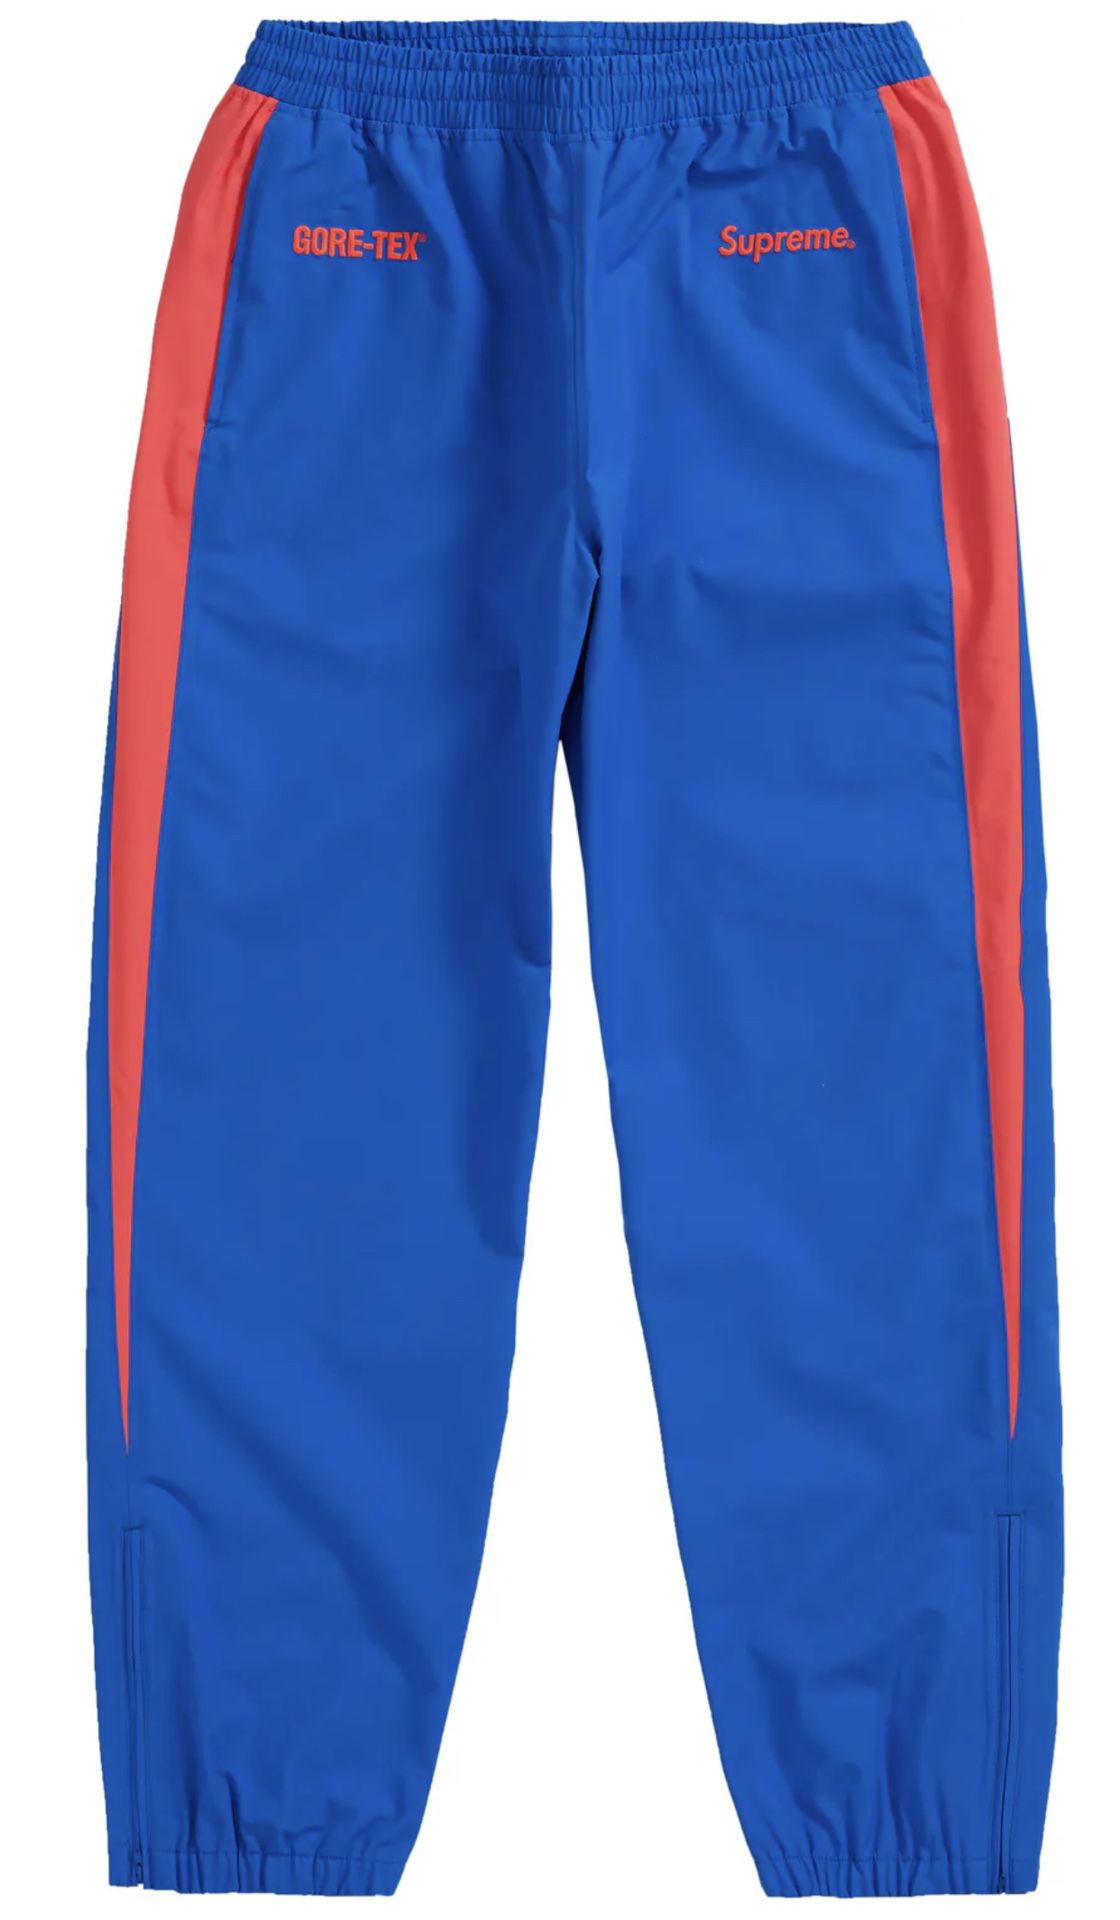 SUPREME GORE-TEX Blue pant XL Brand new With Tags(Also Have The Jacket in large)